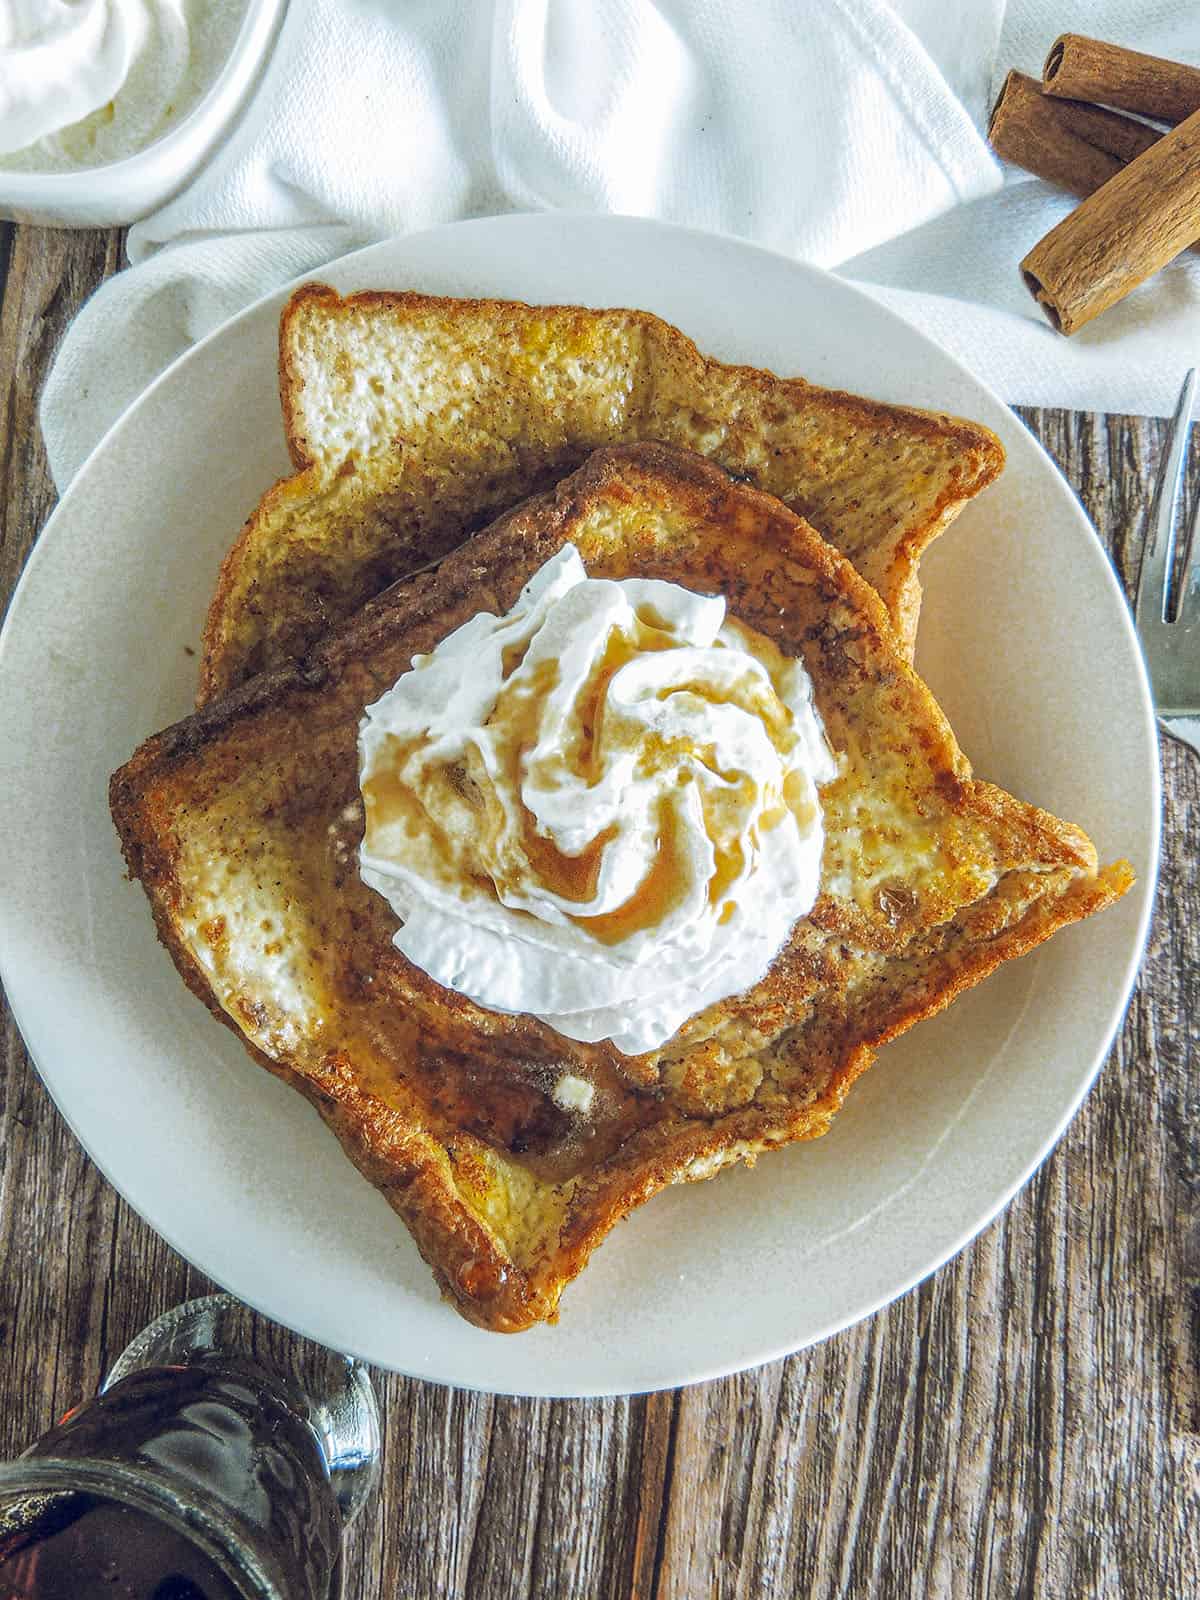 Two pieces of baileys french toast on a cream colored plate.